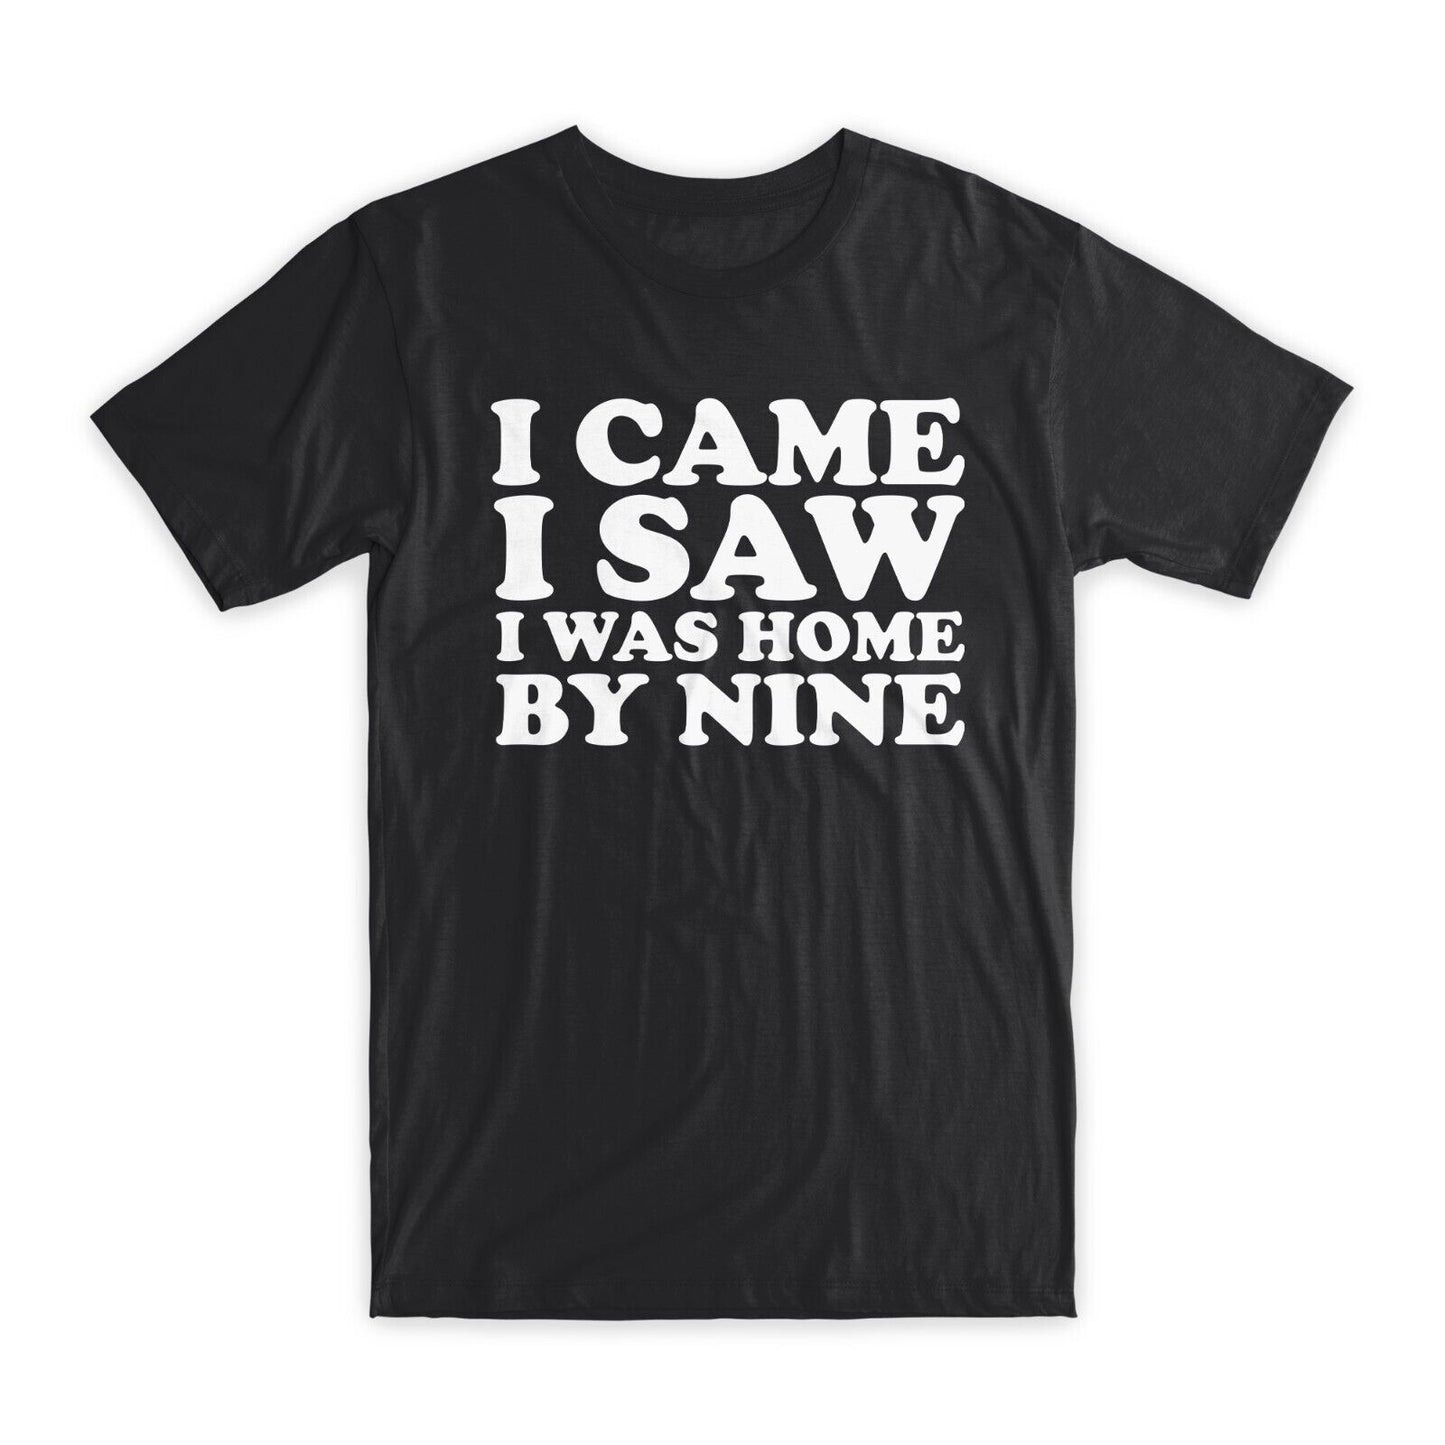 I Came I Saw I Was Home By Nine T-Shirt Premium Soft Cotton Funny Tees Gift NEW